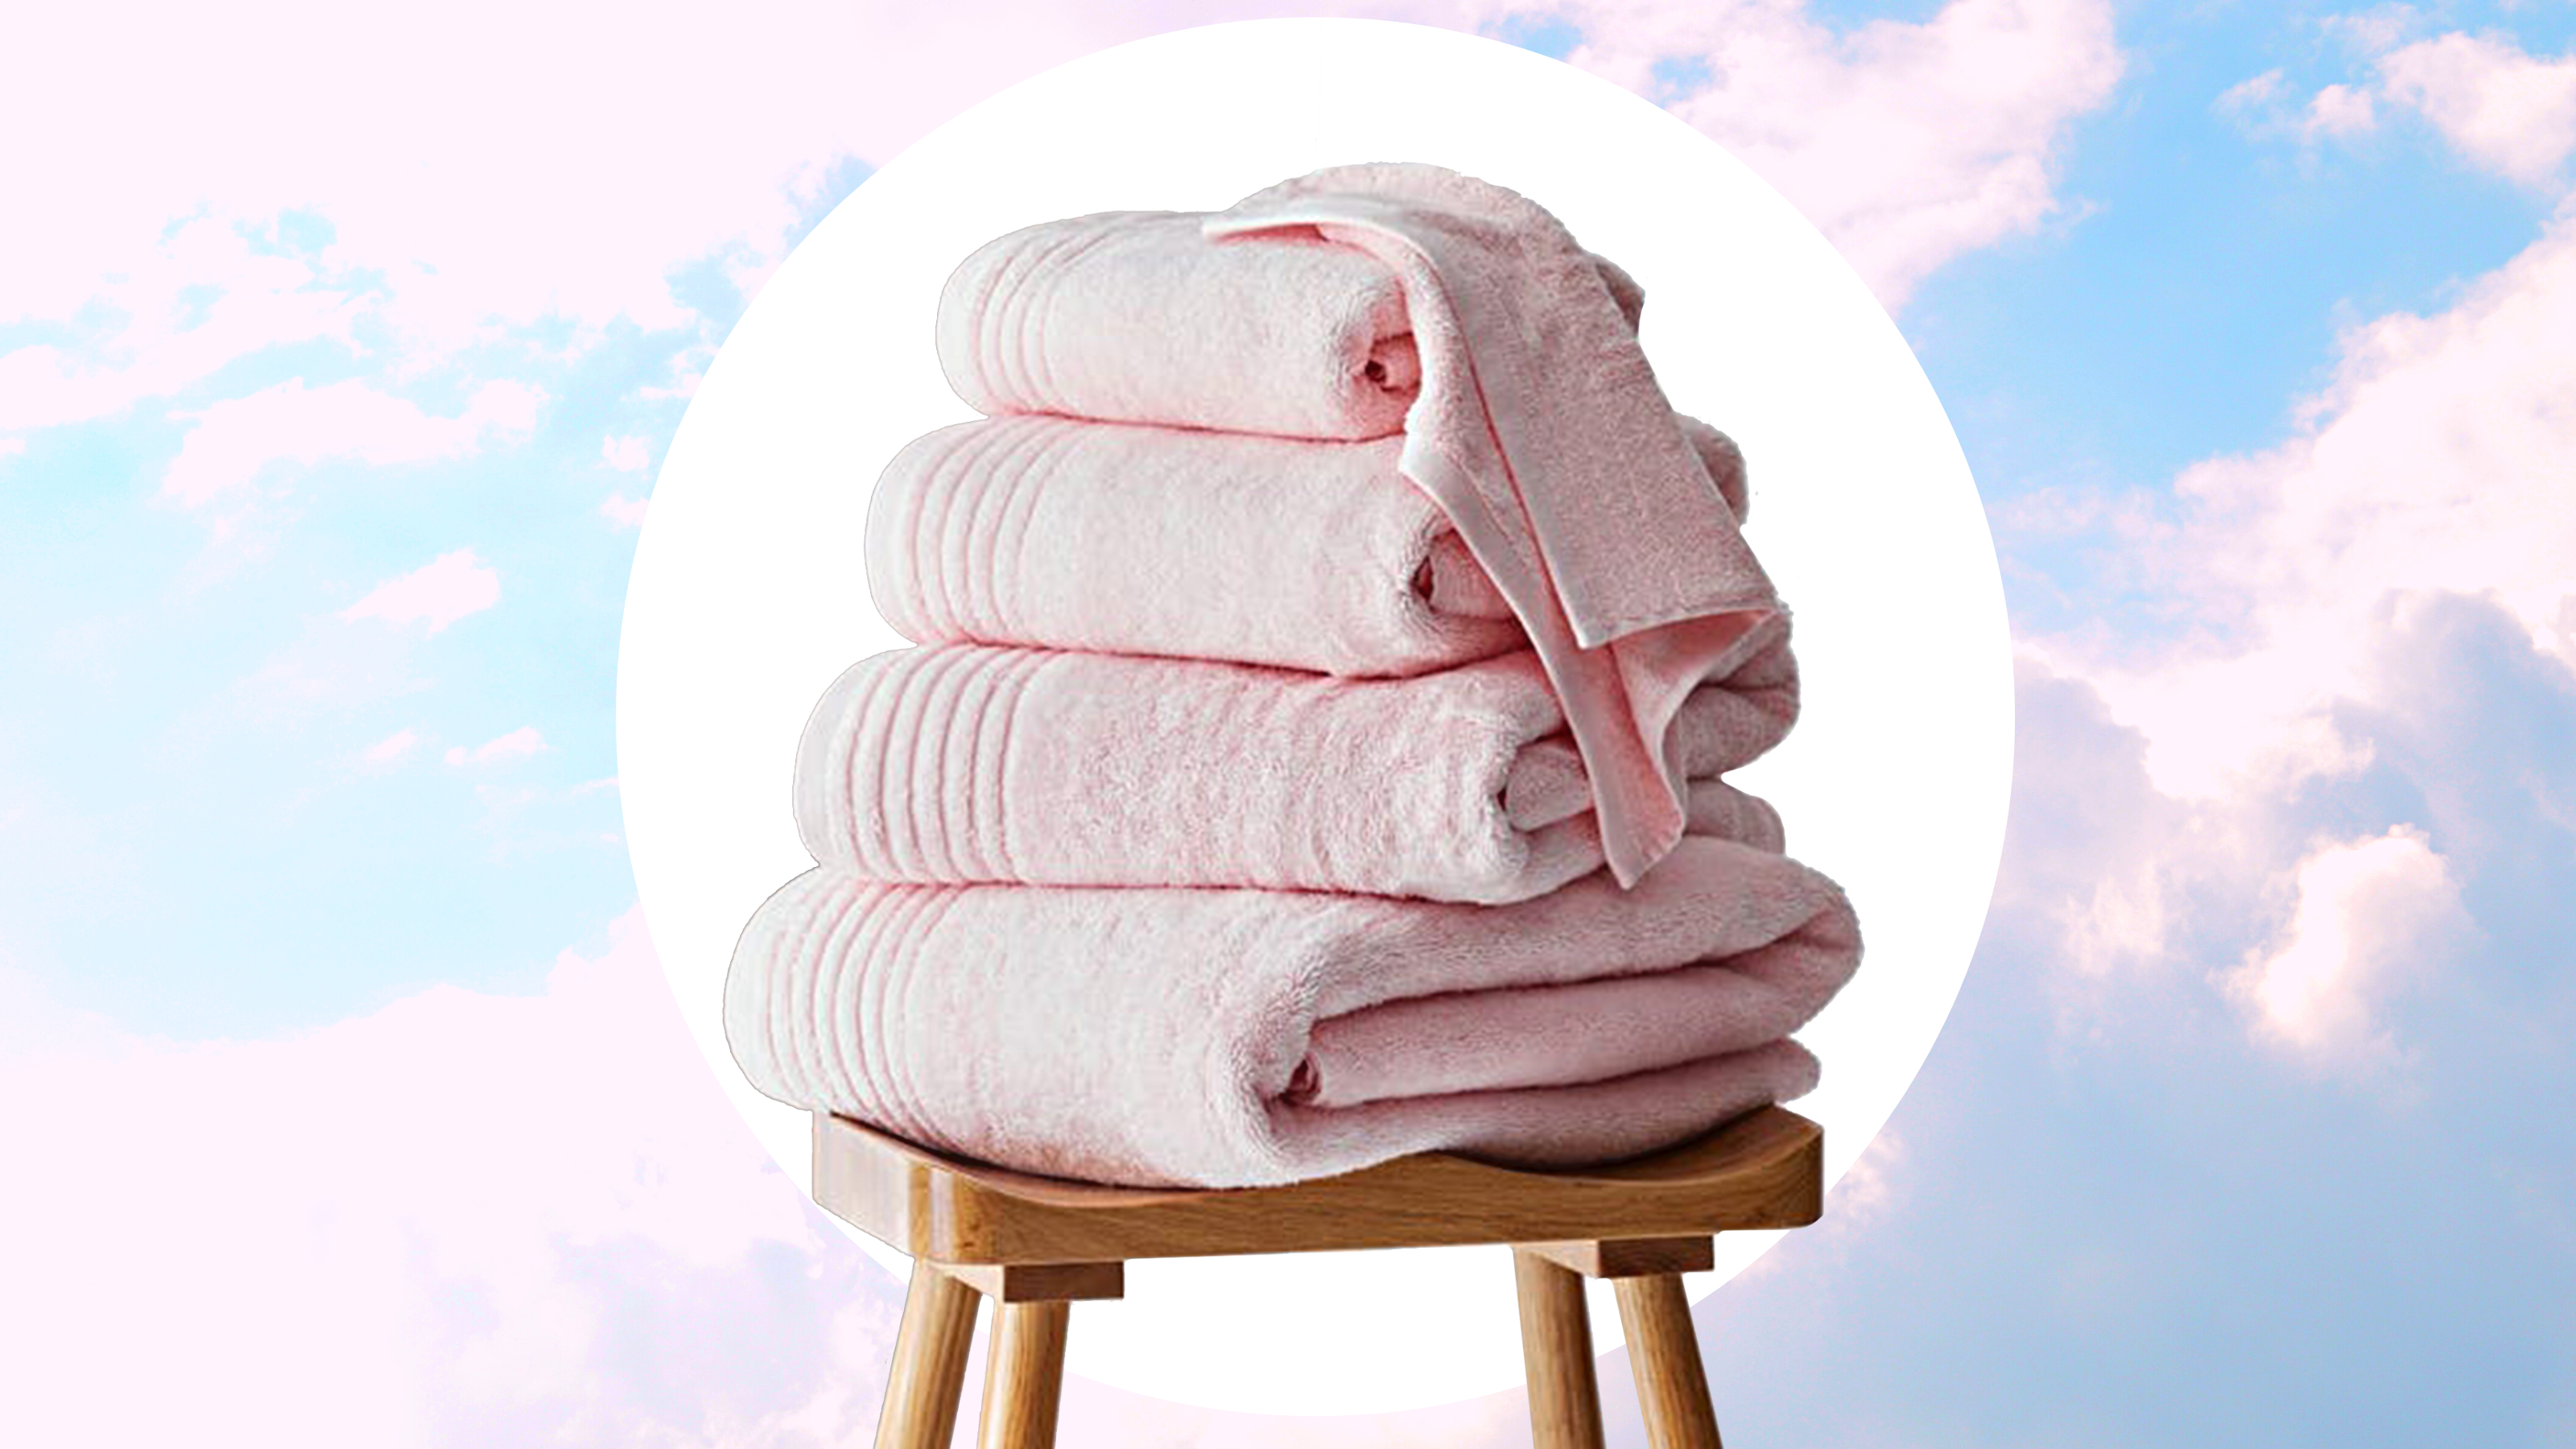 How to Always Have Soft and Fluffy Towels - Snug & Cozy Life